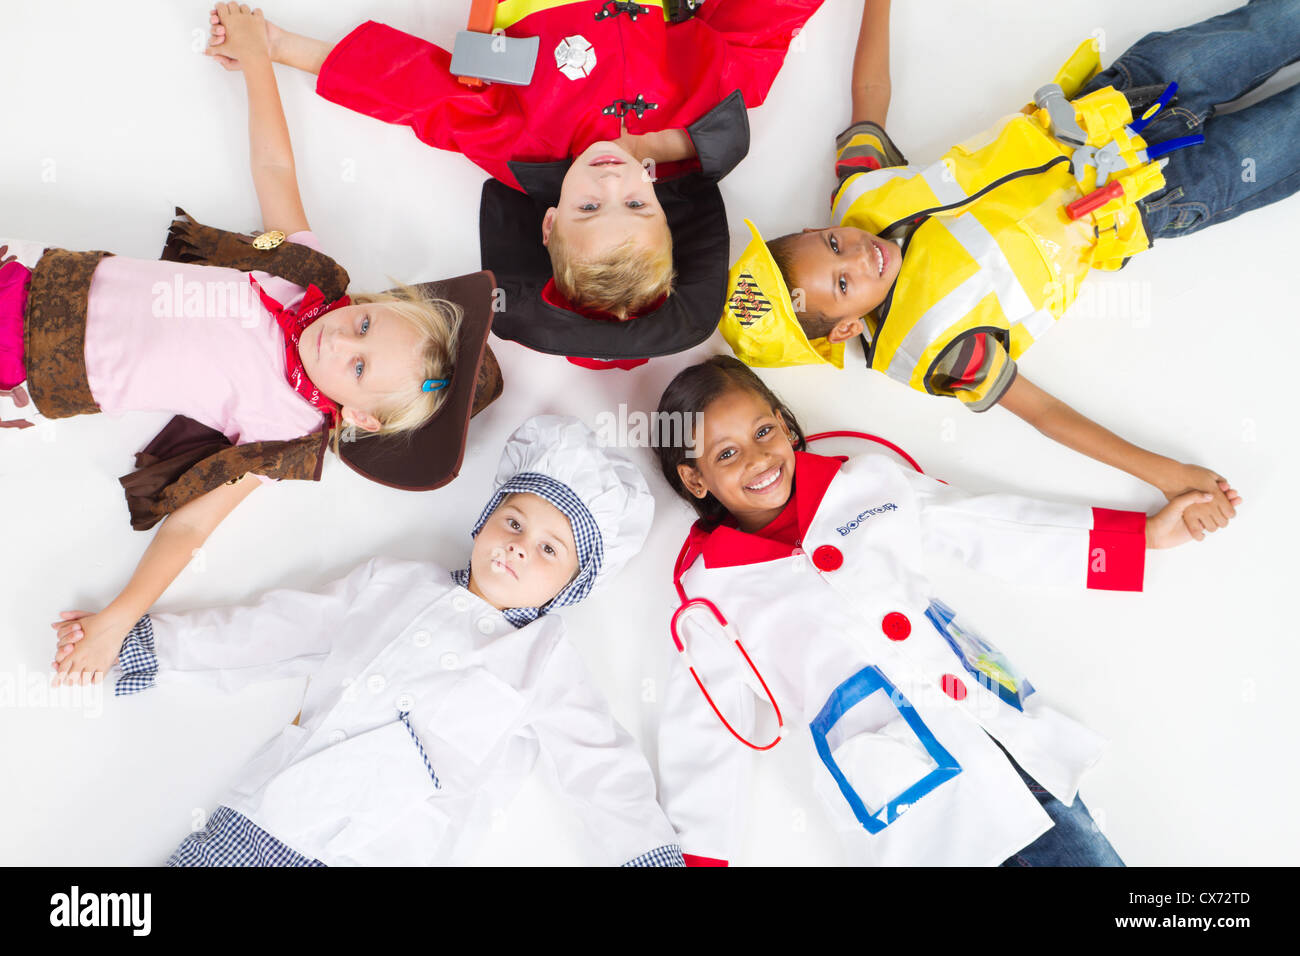 group of kids in various uniforms lying on floor Stock Photo